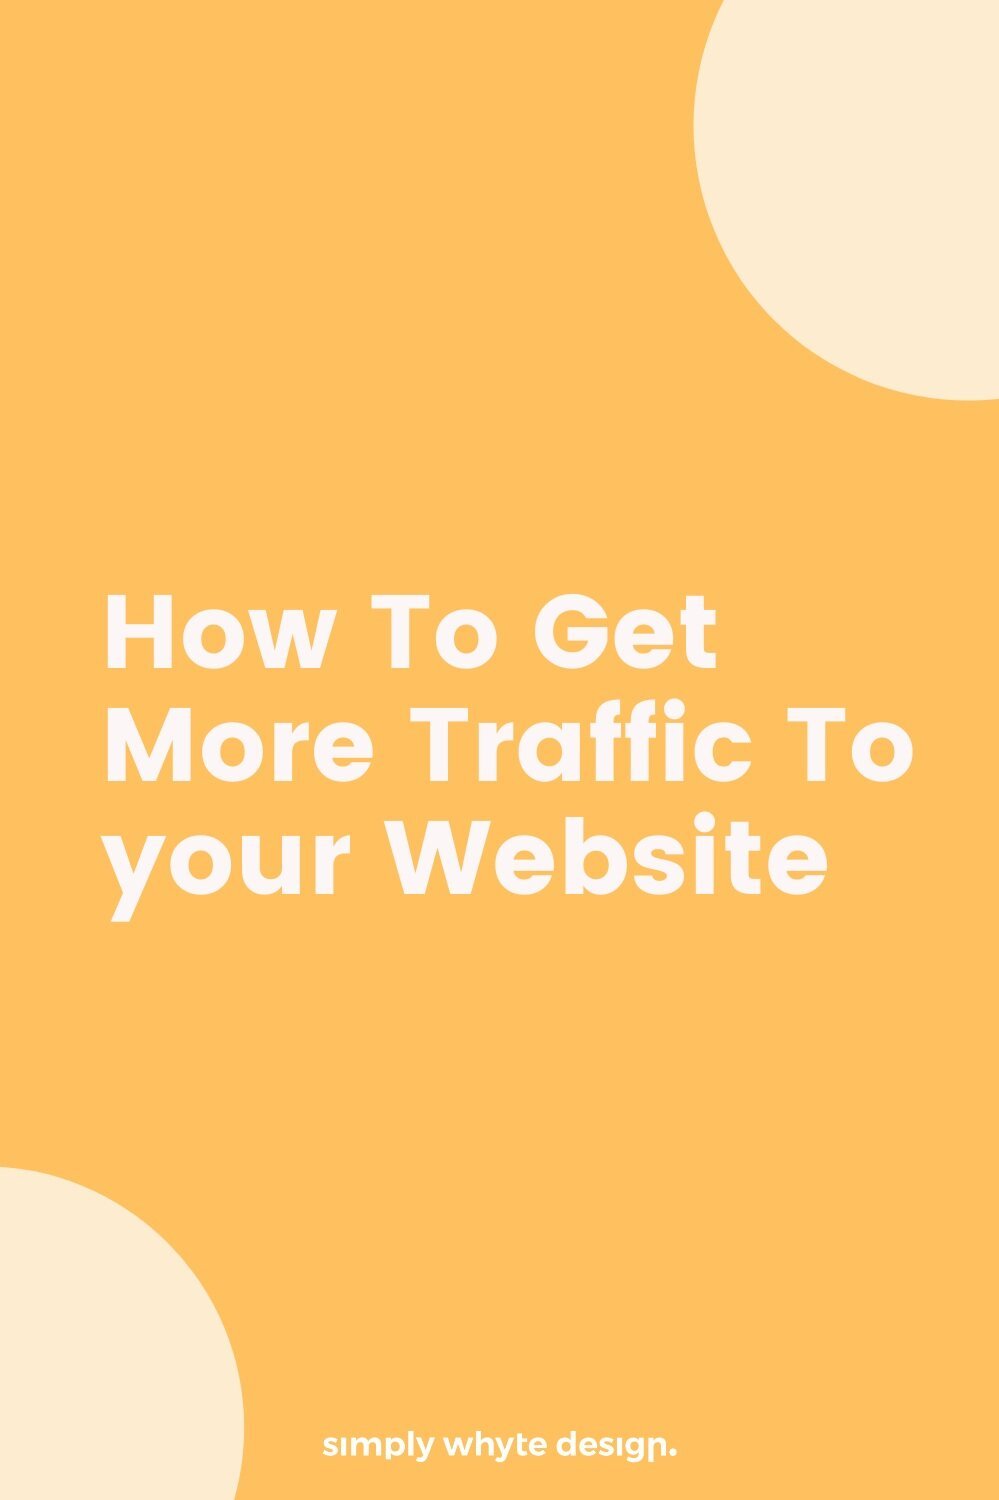 How+To+Get+More+Traffic+To+your+Website.jpg